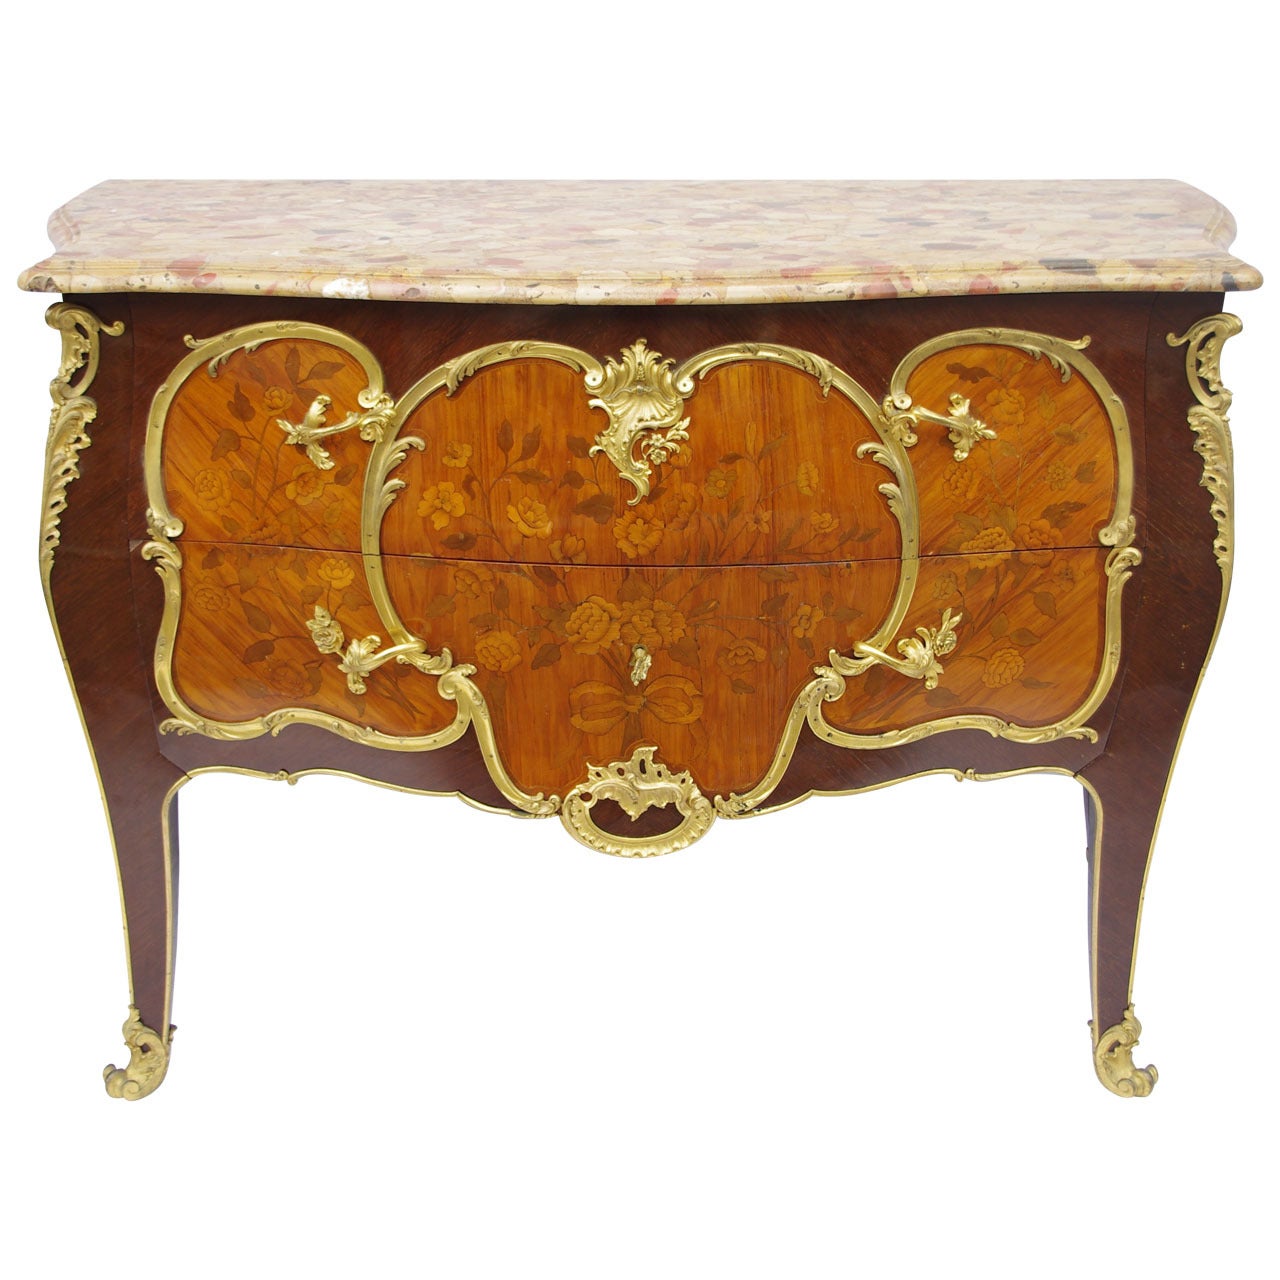 Louis XV Period Commode Stamped Léonard Boudin